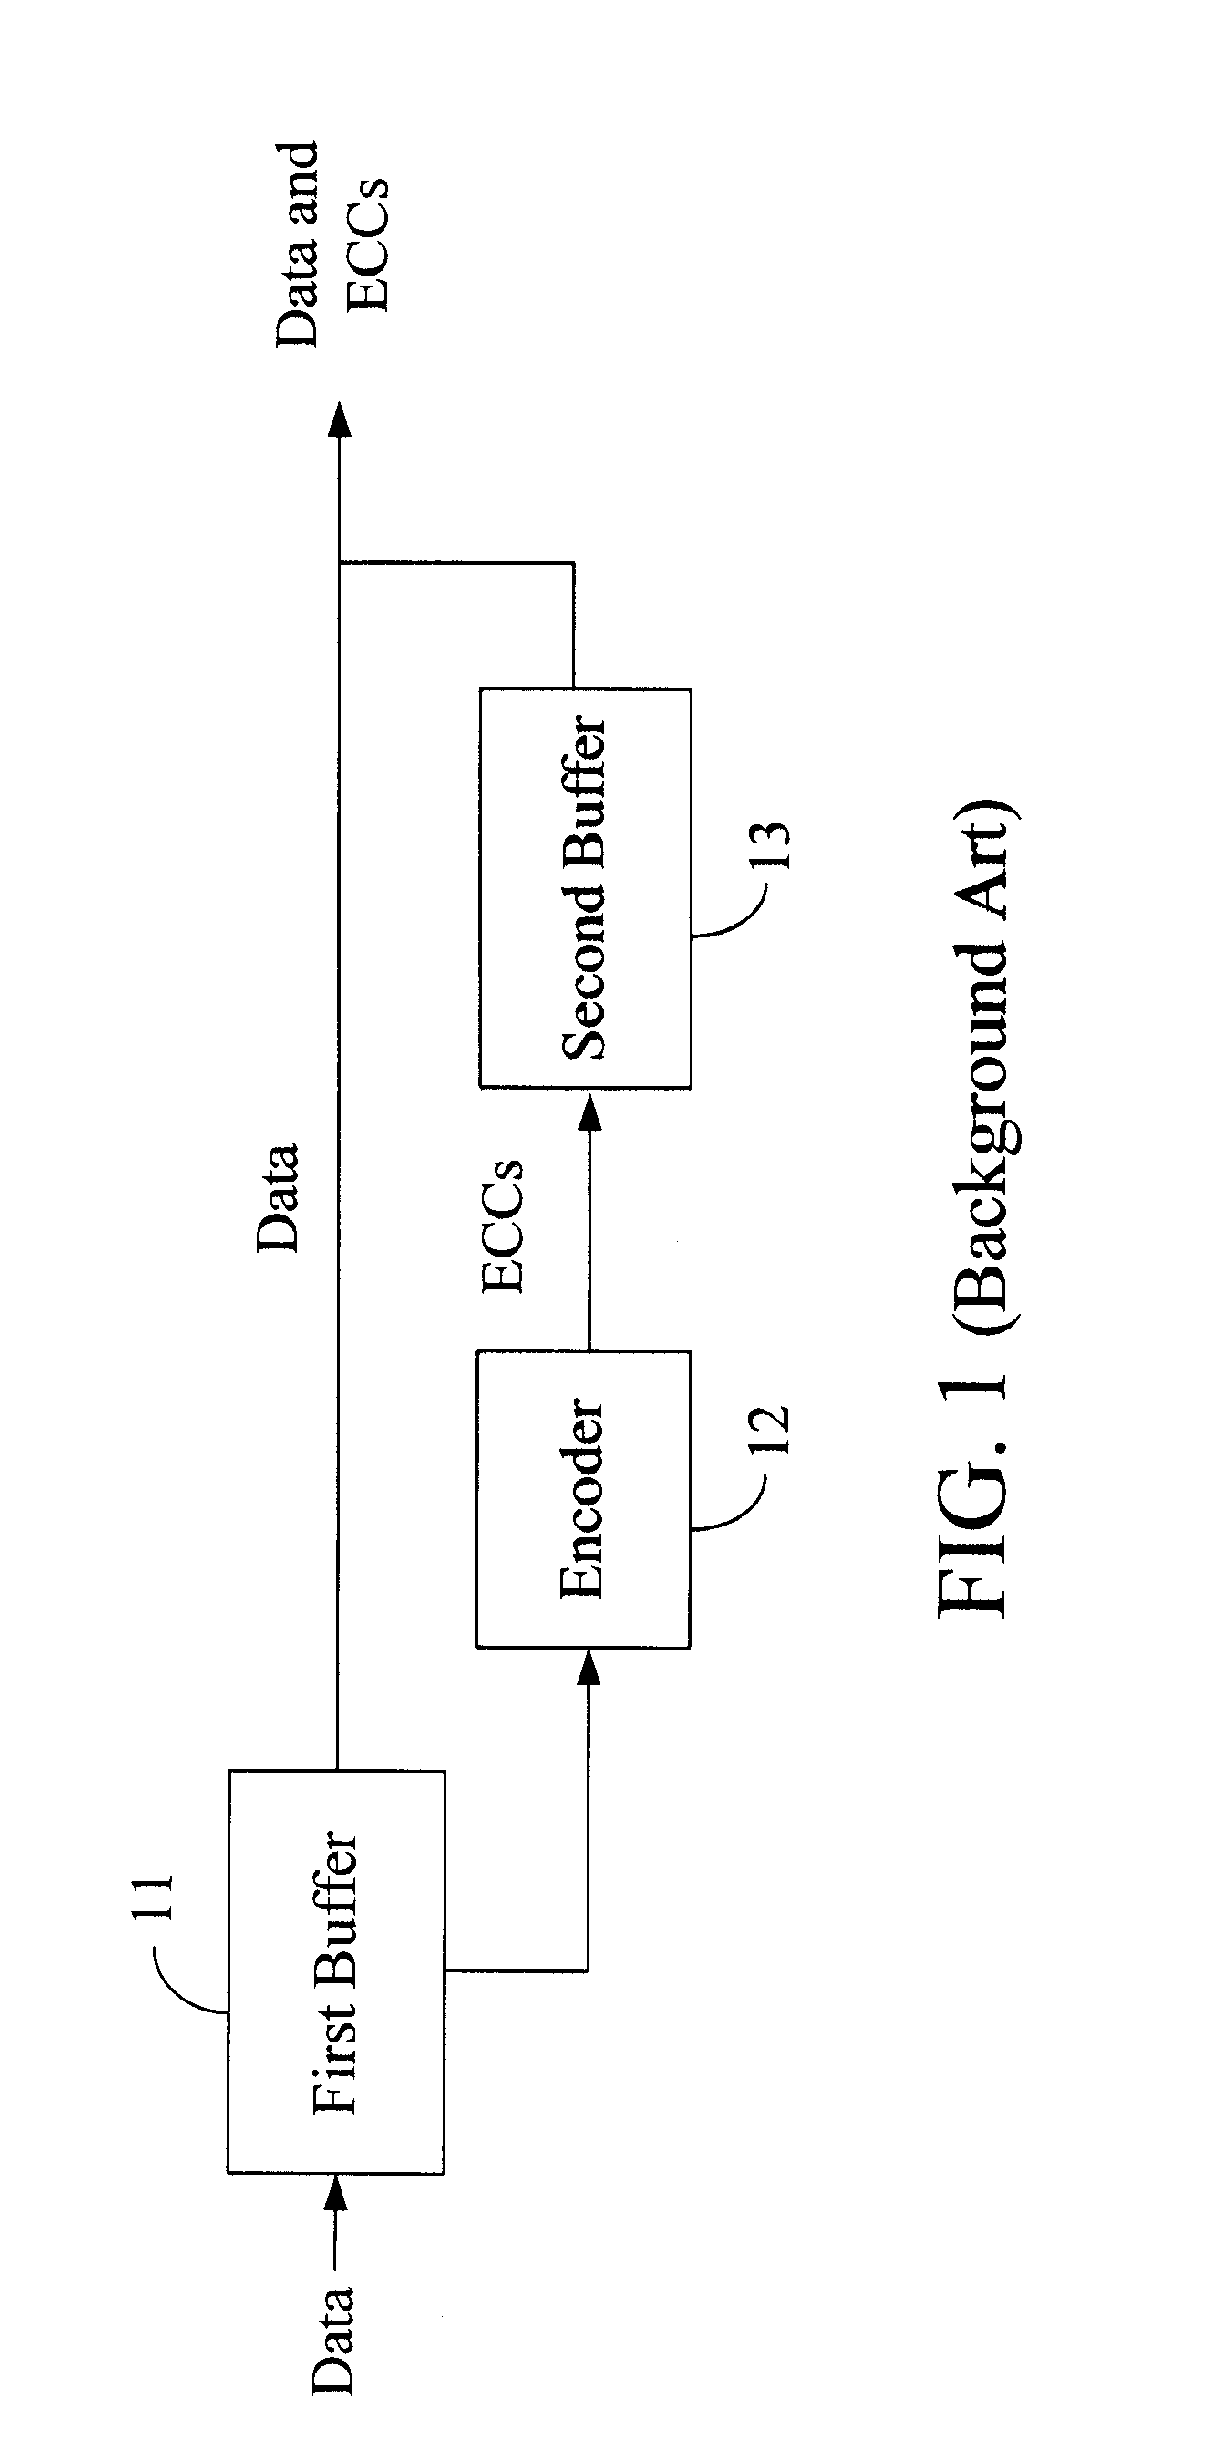 Data recording method for optical disk drive